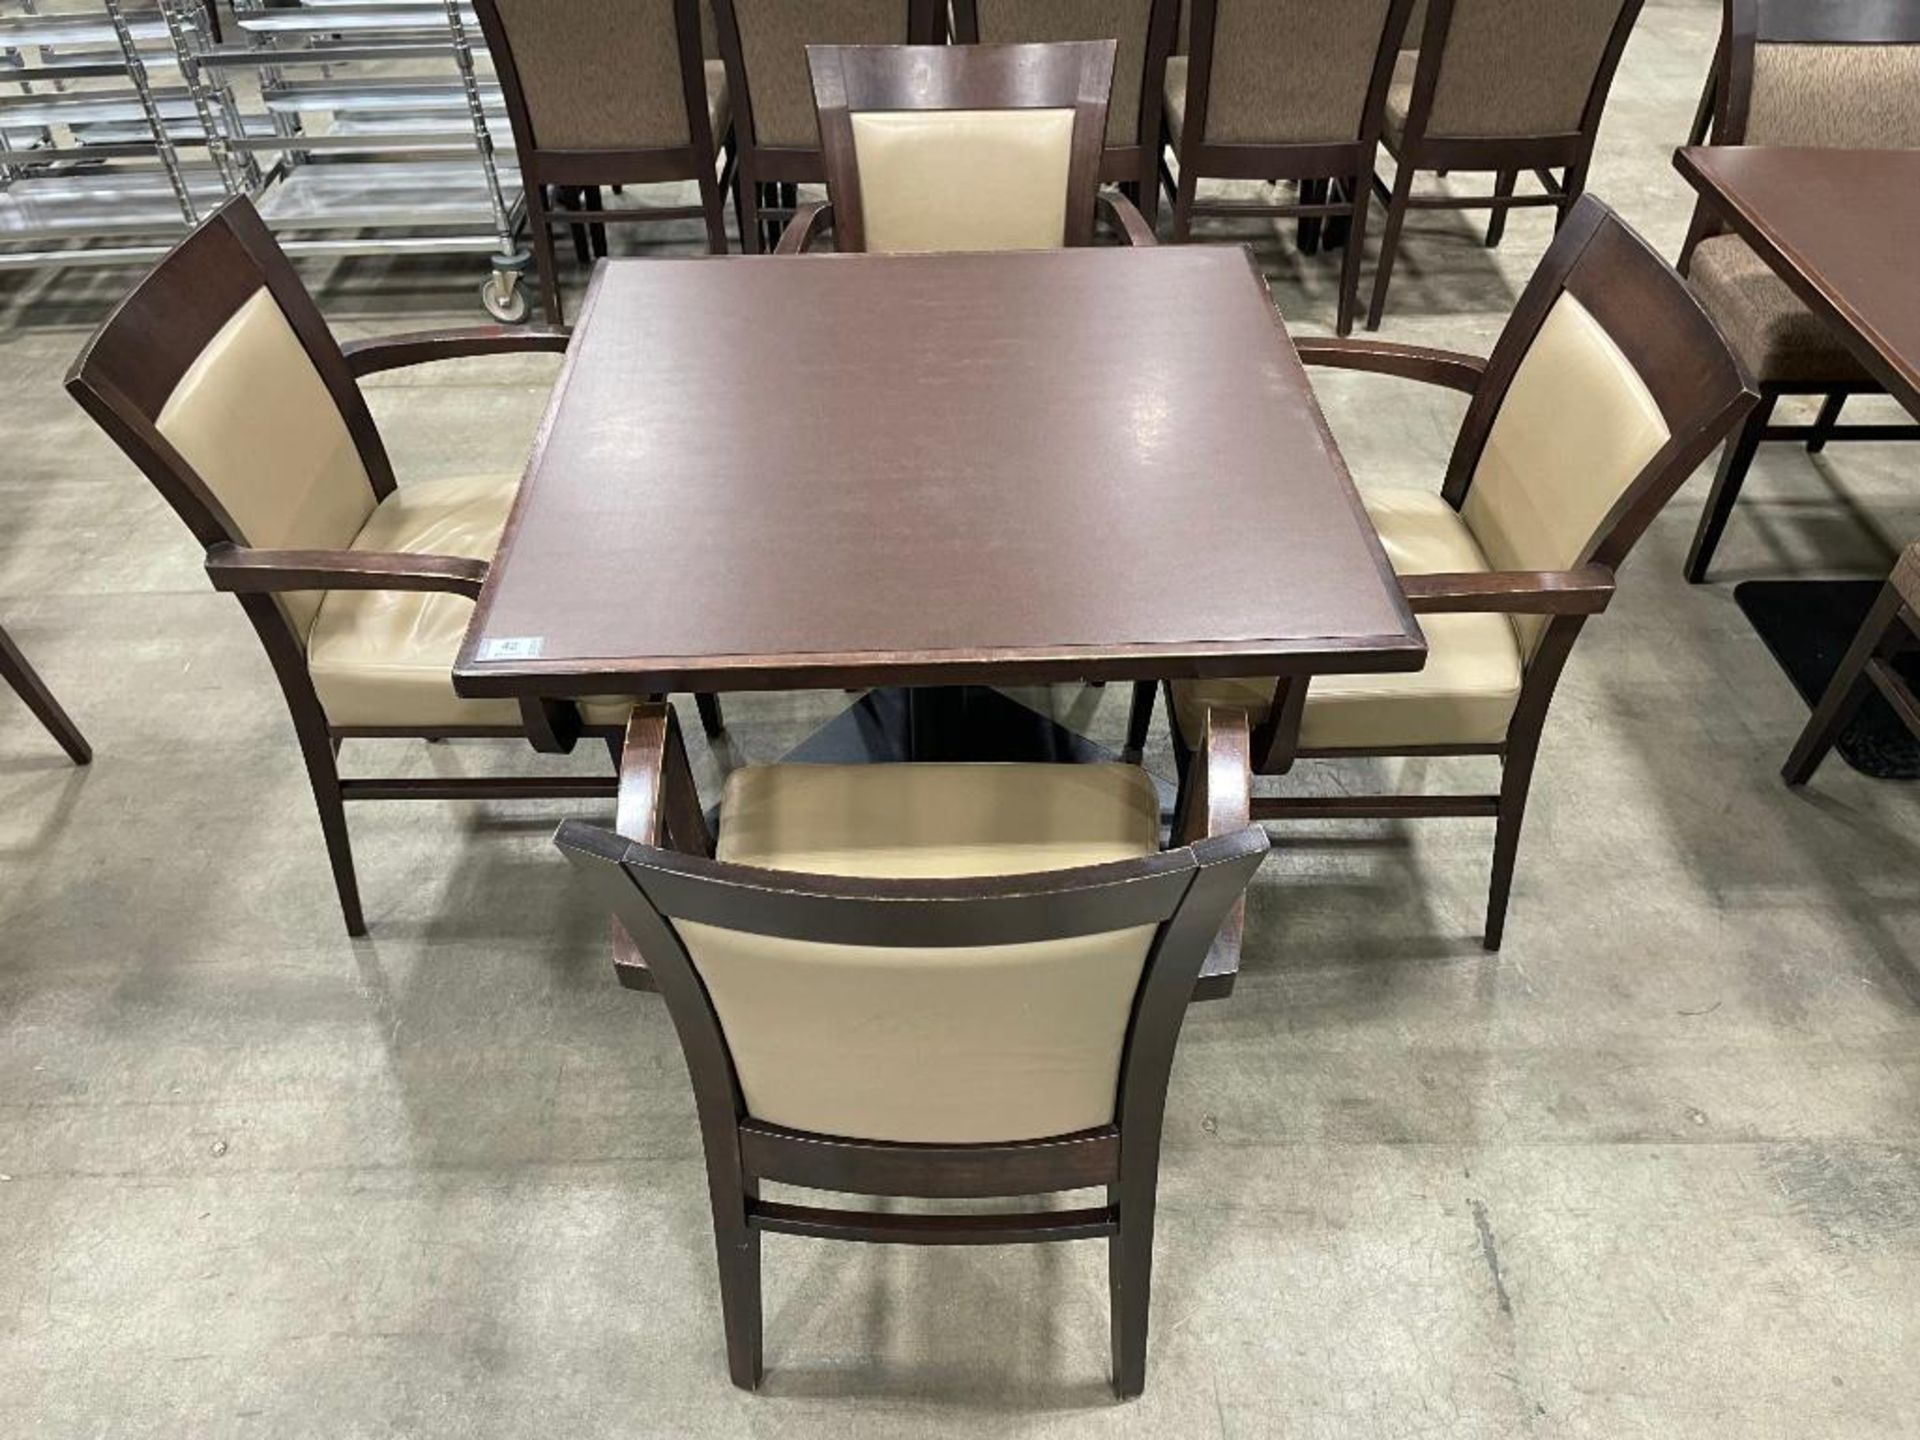 36" X 36" SINGLE PEDESTAL DINING TABLE WITH (4) ADRIA MICHELLE ARM CHAIRS - Image 2 of 5